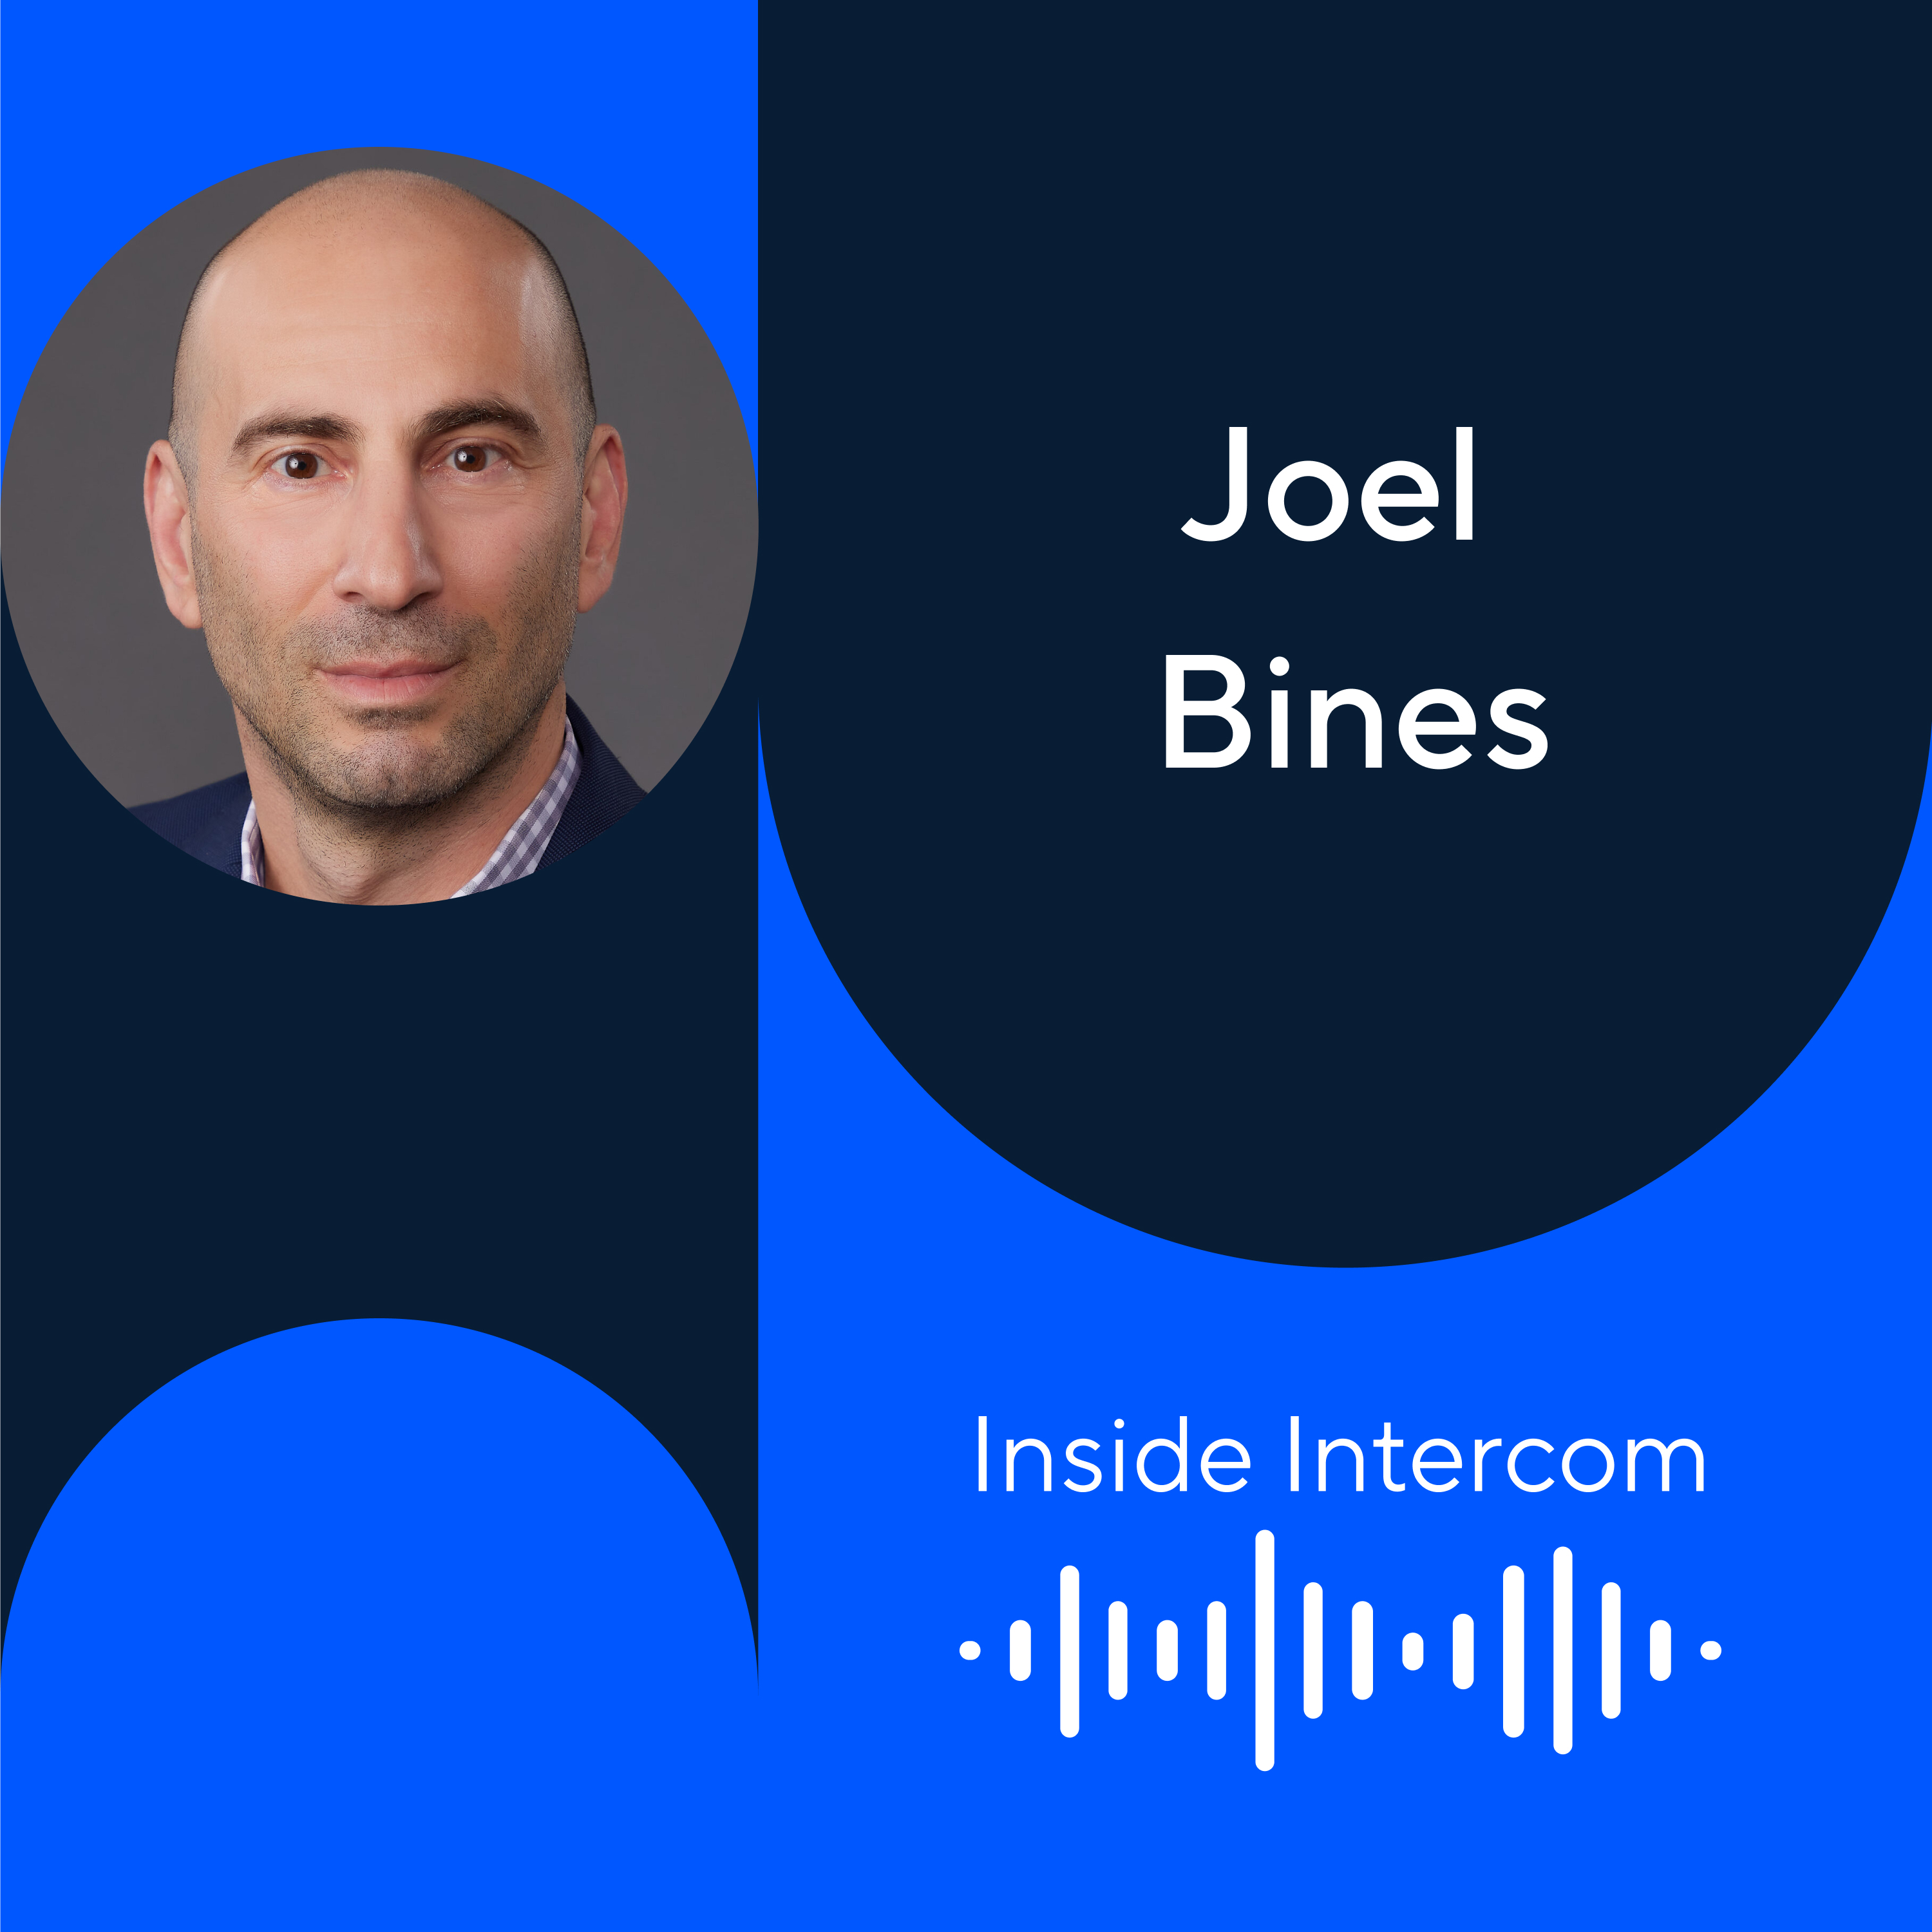 Retail expert Joel Bines on the rise of the “me-centric” economy